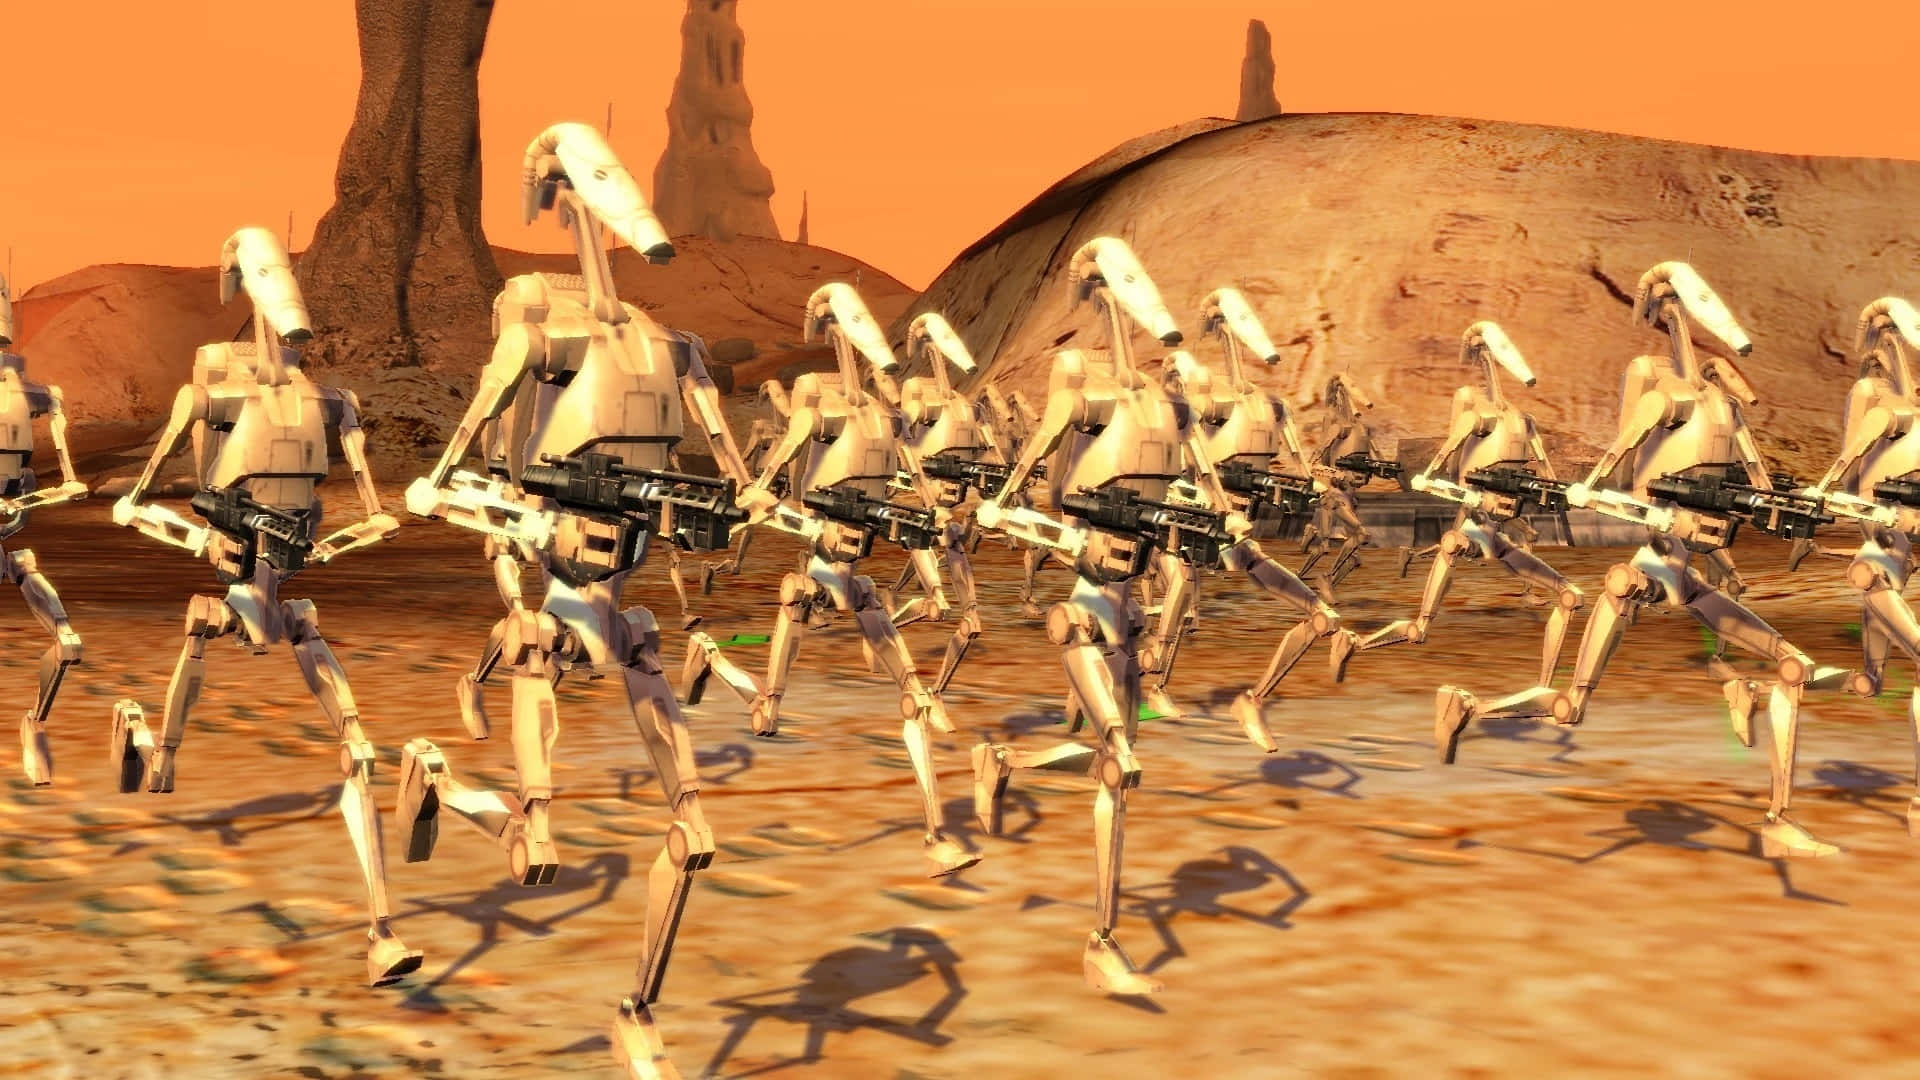 Join the Droid Army! Wallpaper